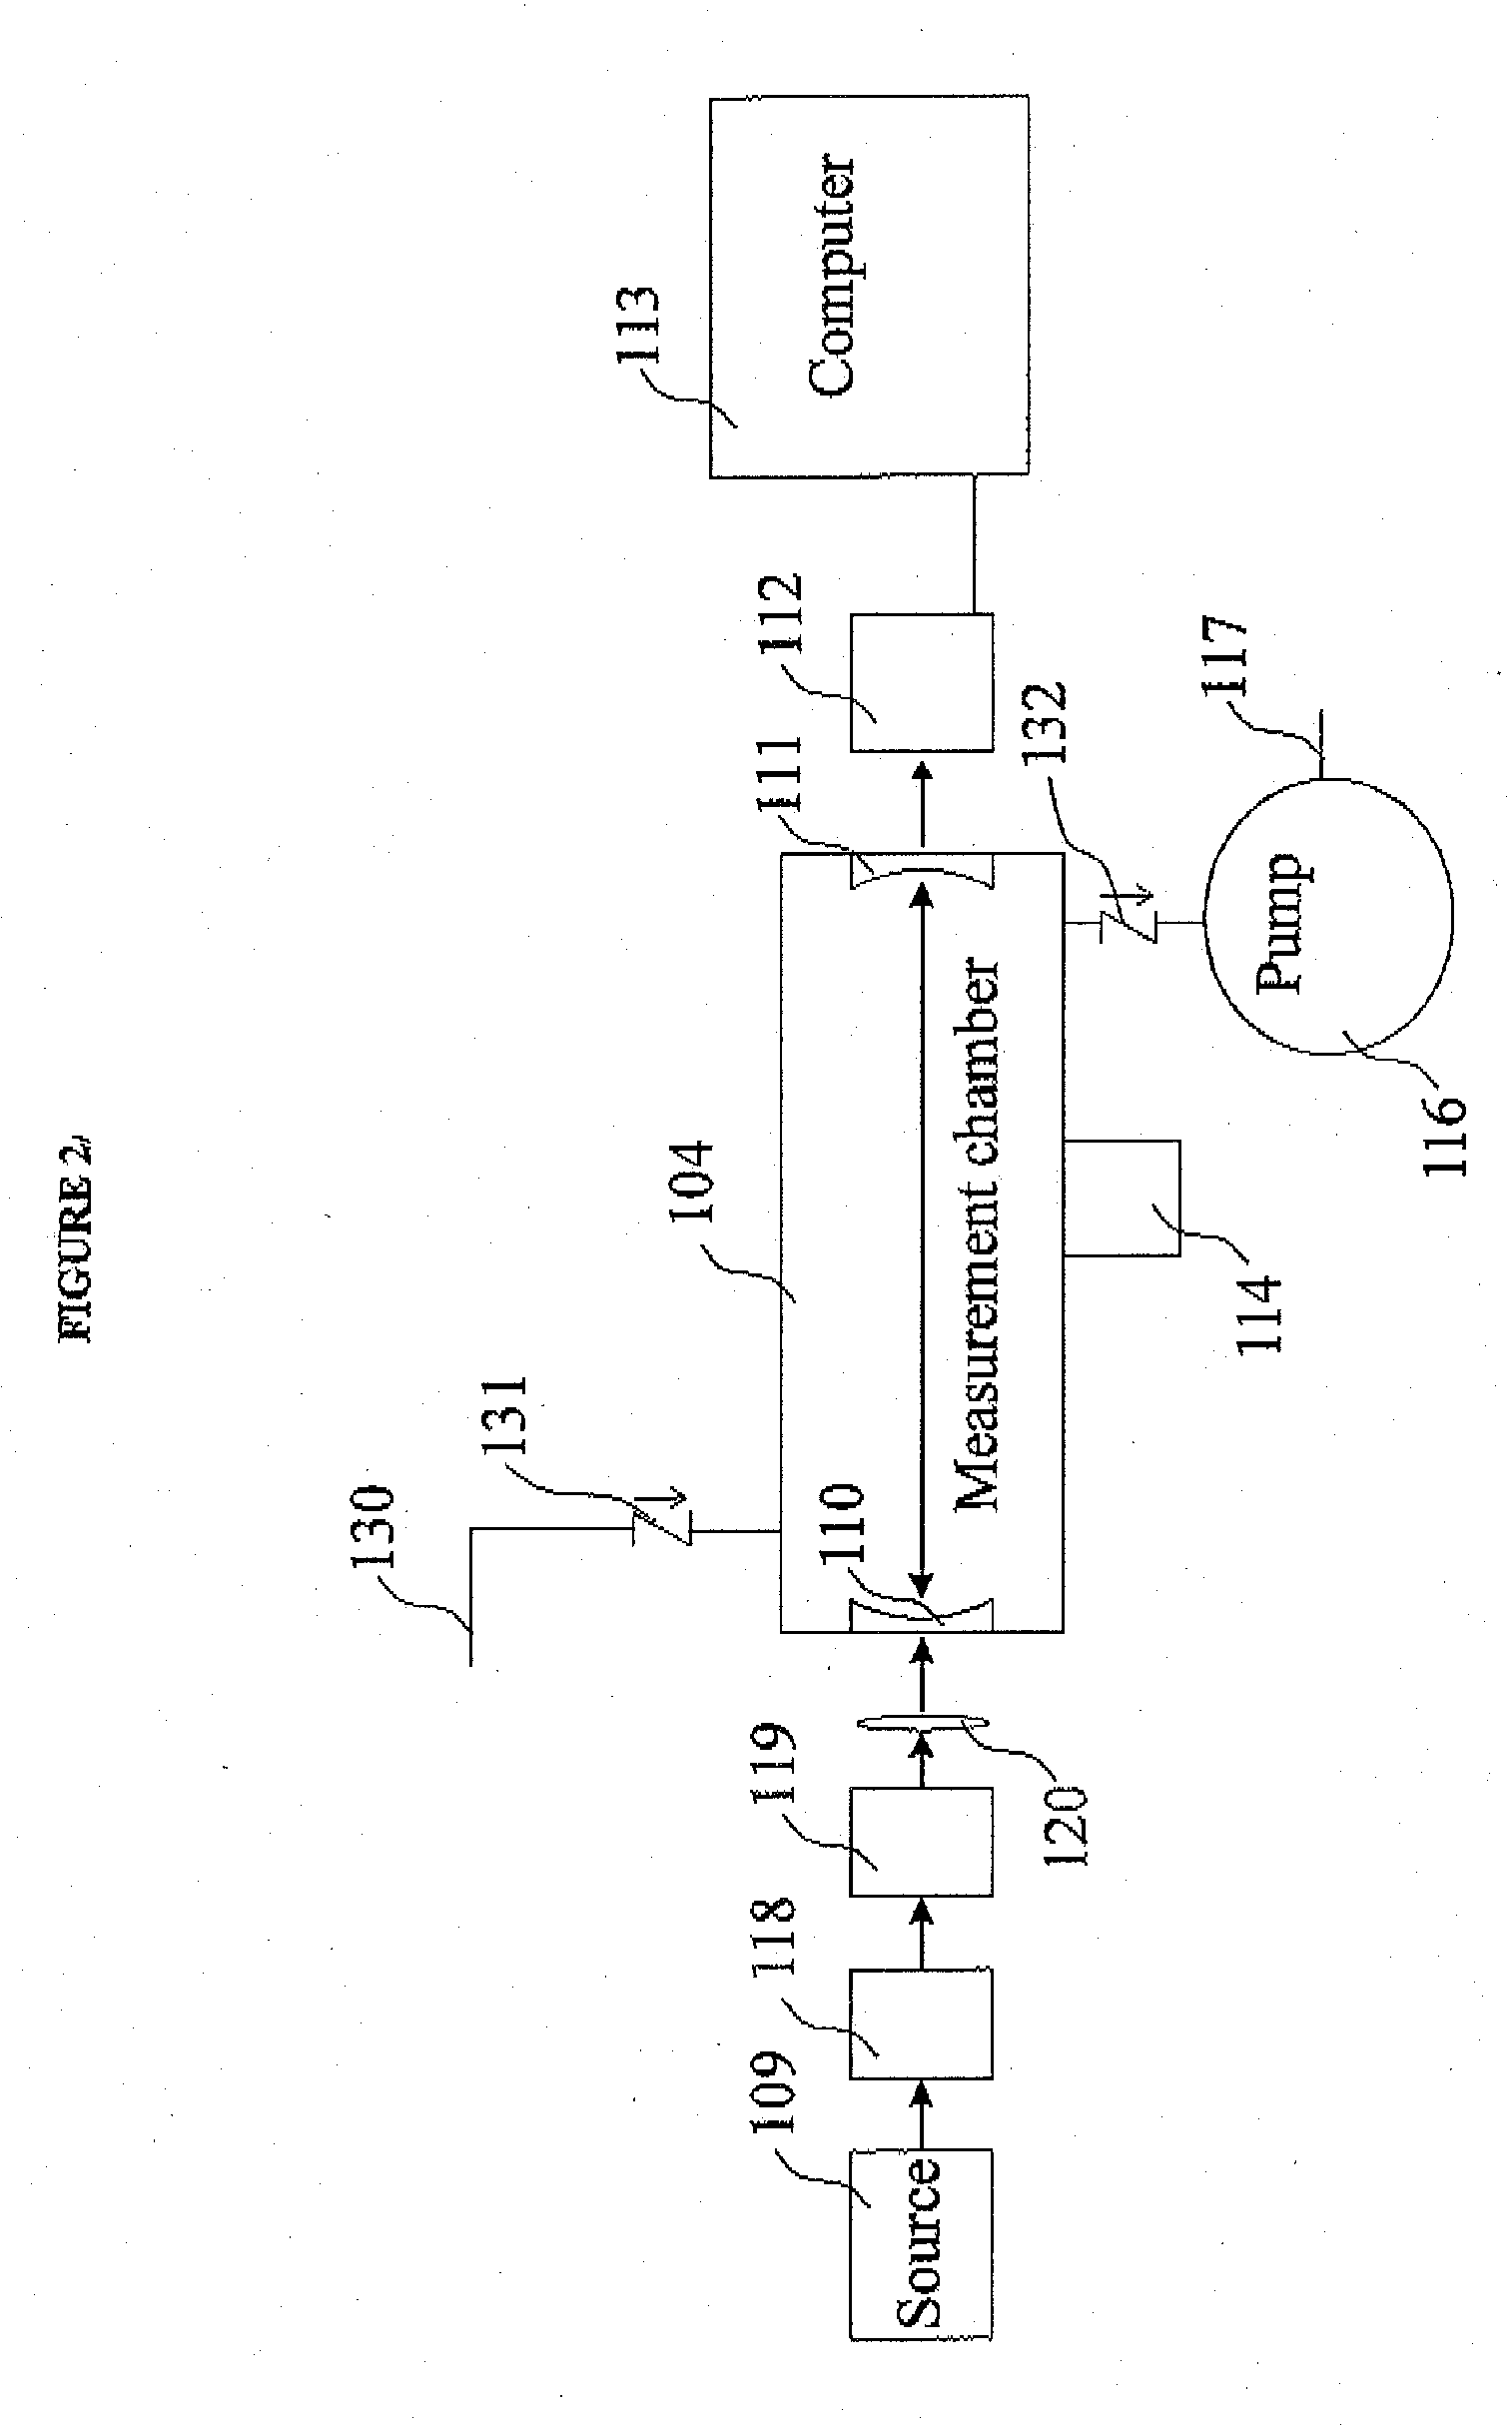 Apparatus and method for rapid and accurate quantification of an unknown, complex mix